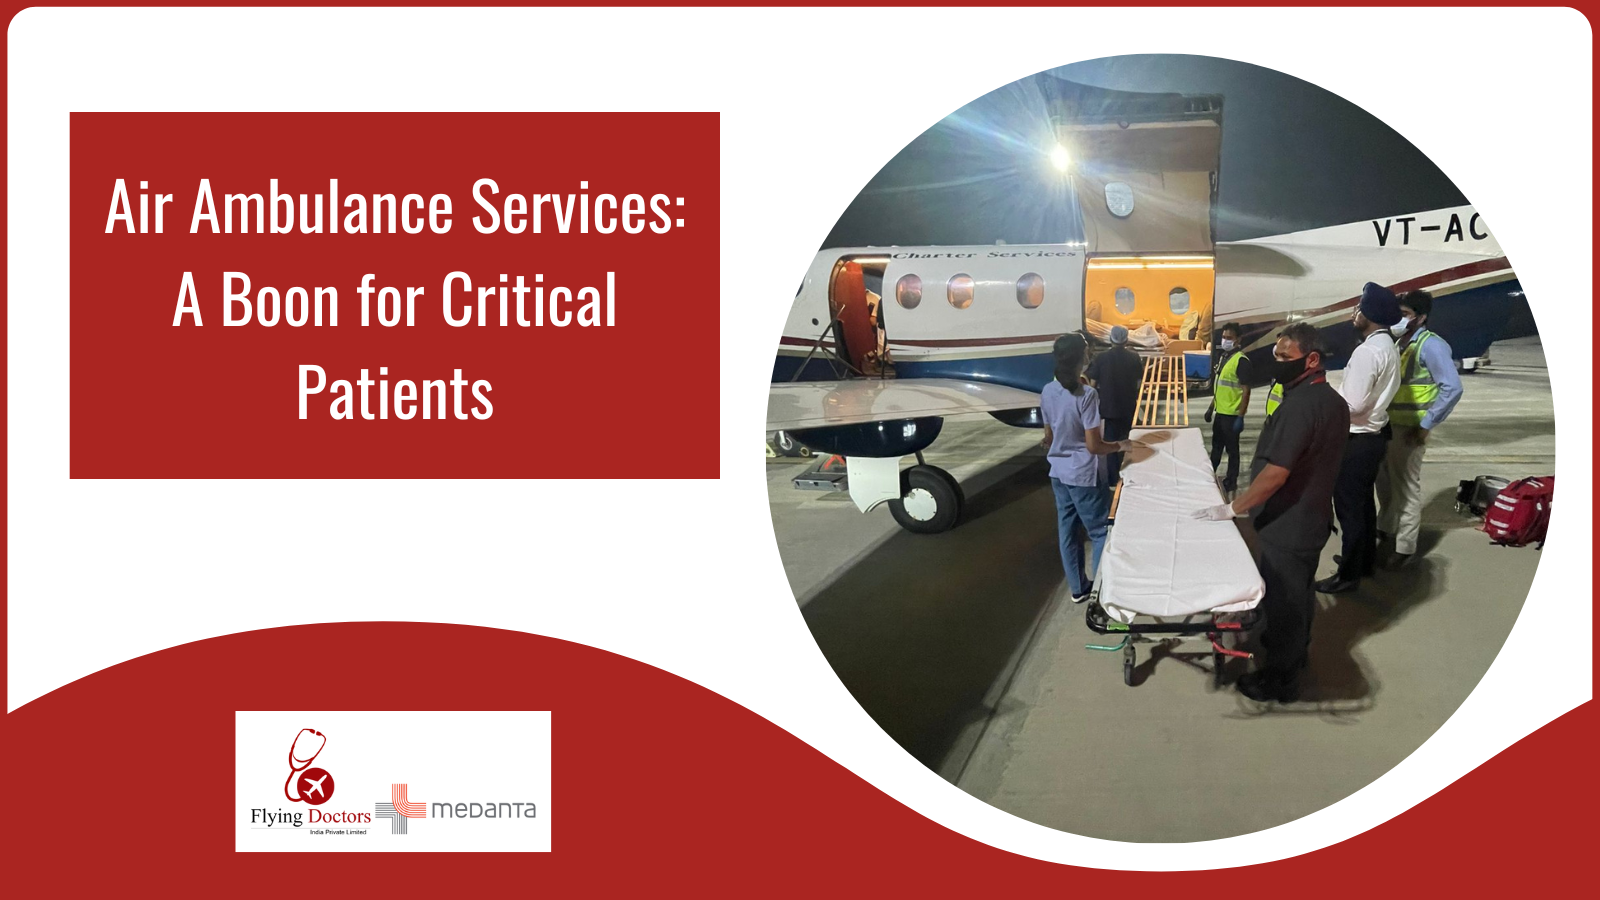 Air Ambulance Services: A Boon for Critical Patients